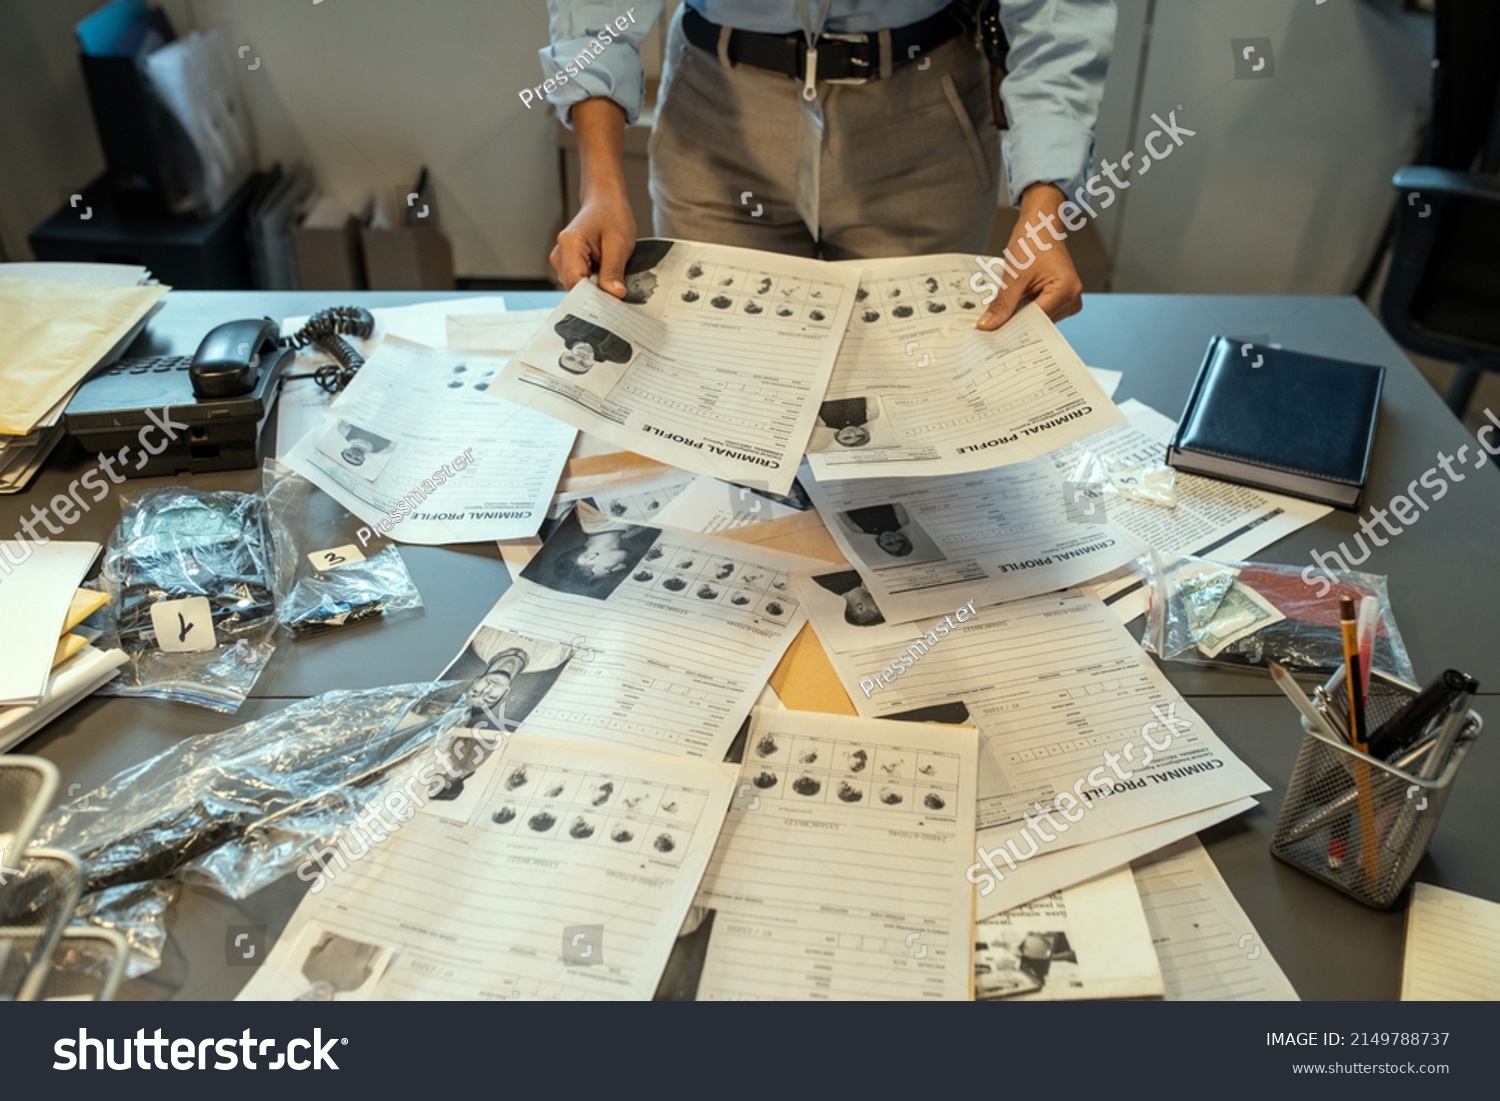 Hands of female investigator holding criminal profiles over desk with documents while learning personal information about suspects #2149788737